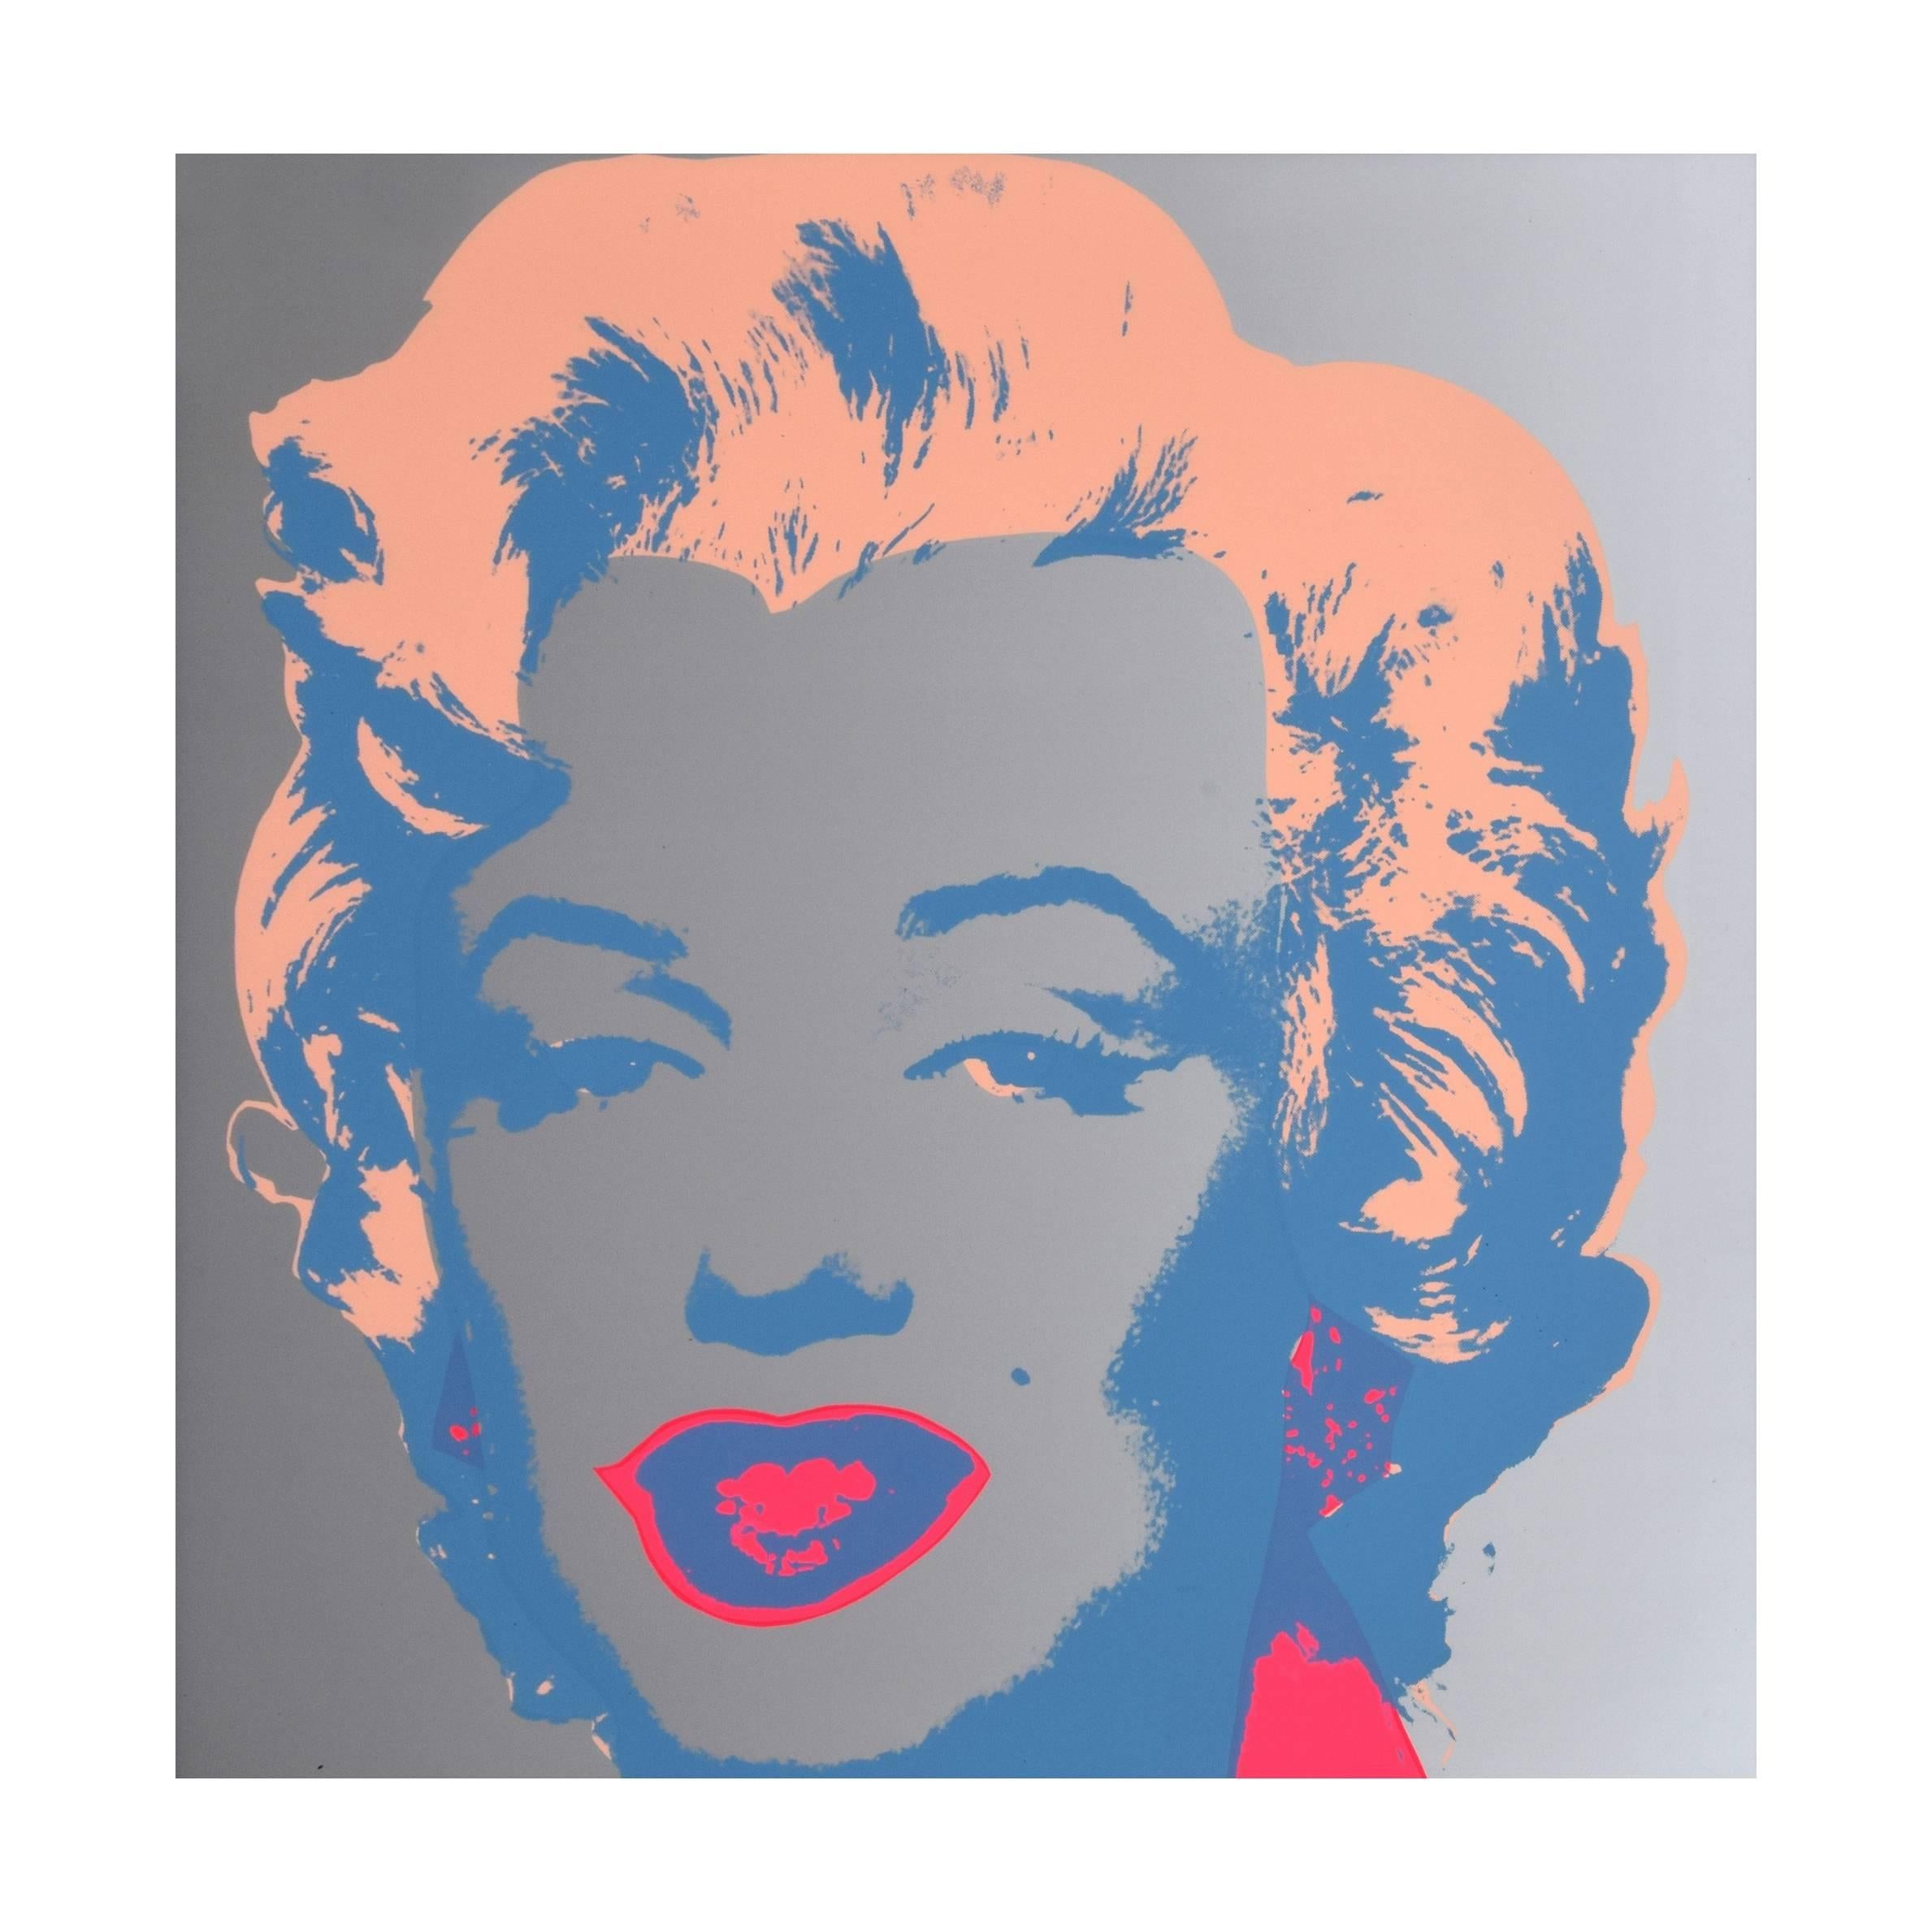 Andy Warhol (After) "Marilyn" Silkscreen For Sale